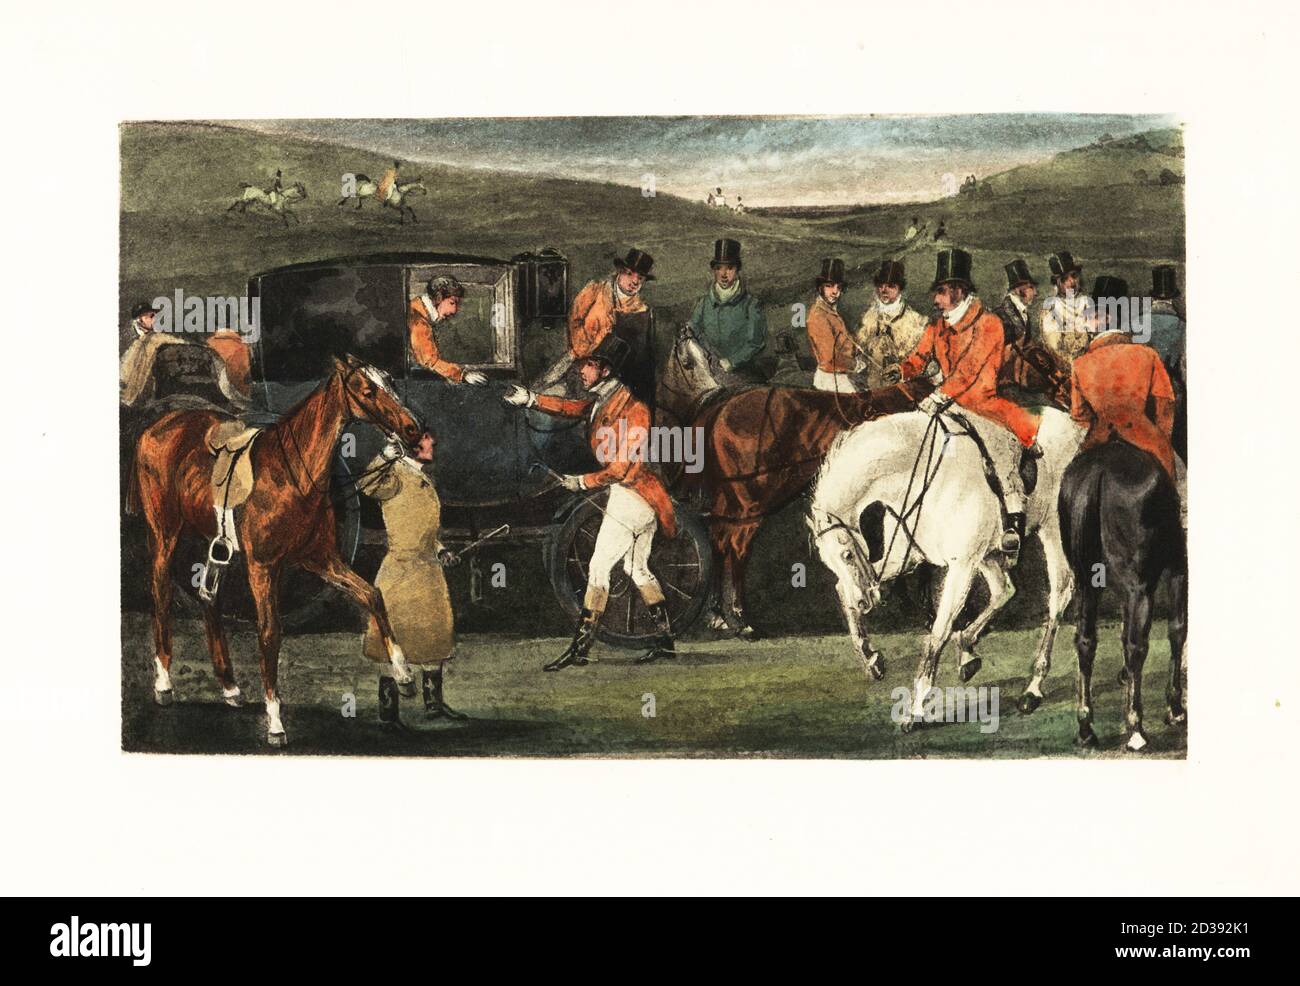 Victorian gentlemen on horseback gathering for a stag hunt. Men in pinks and top hats wait for the hunt to start, while Lord Stanley greets Mytton in his coach.The Meet with Lord Derby’s staghounds. Chromolithographic facsimile of an illustration by Henry Thomas Alken from Memoirs of the Life of the Late John Mytton by Nimrod aka Charles James Apperley, Kegan Paul, London, 1900. Stock Photo